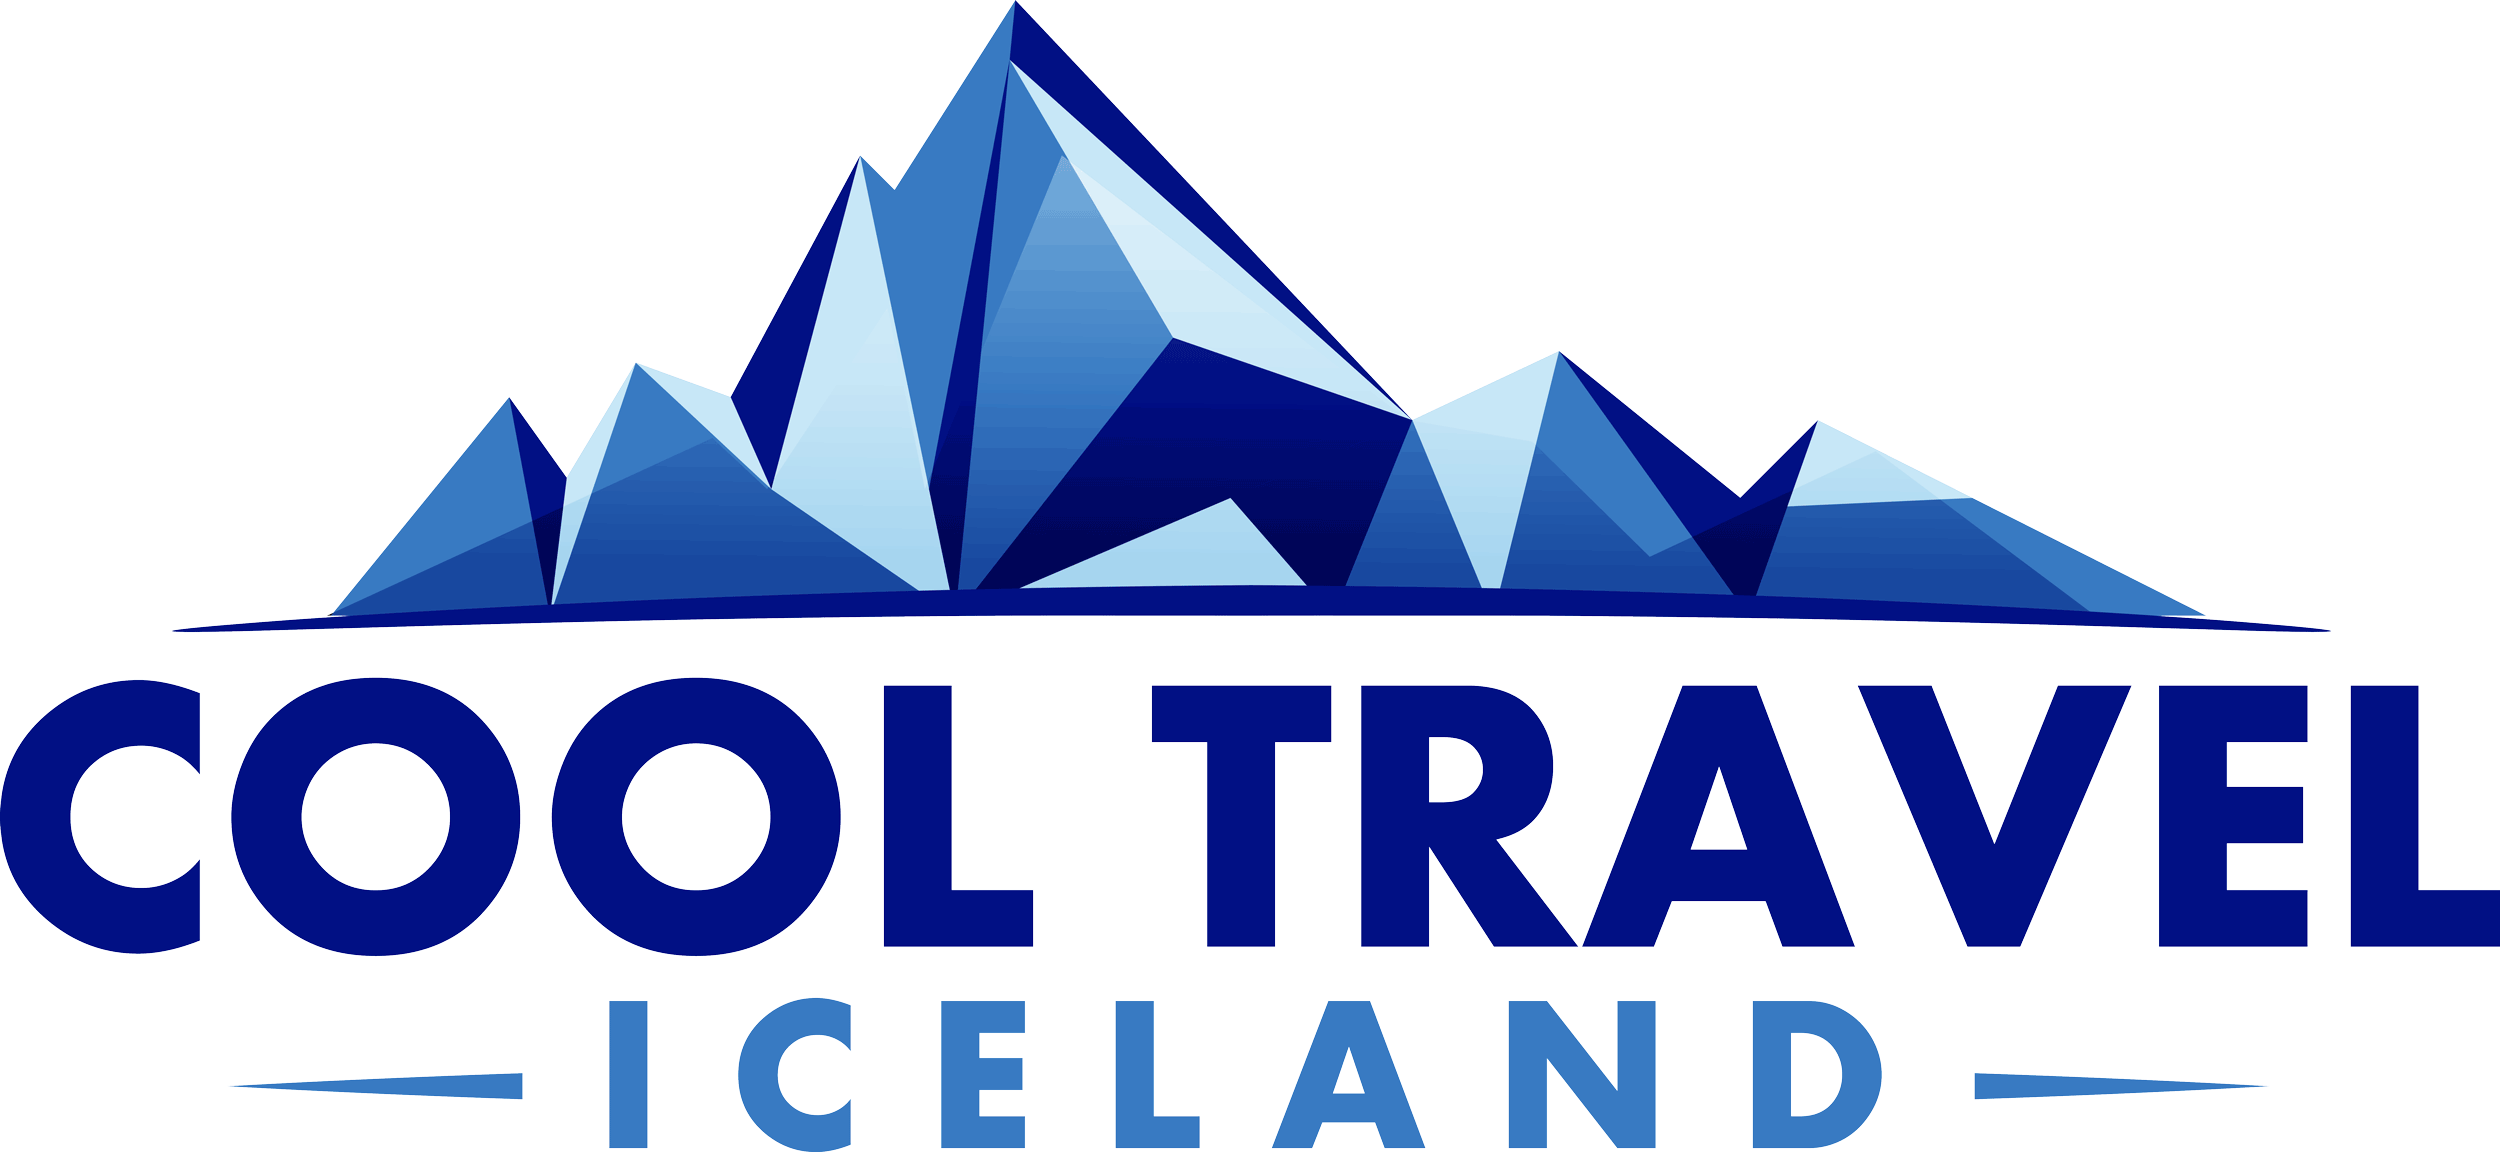 Cool travel Iceland Tours